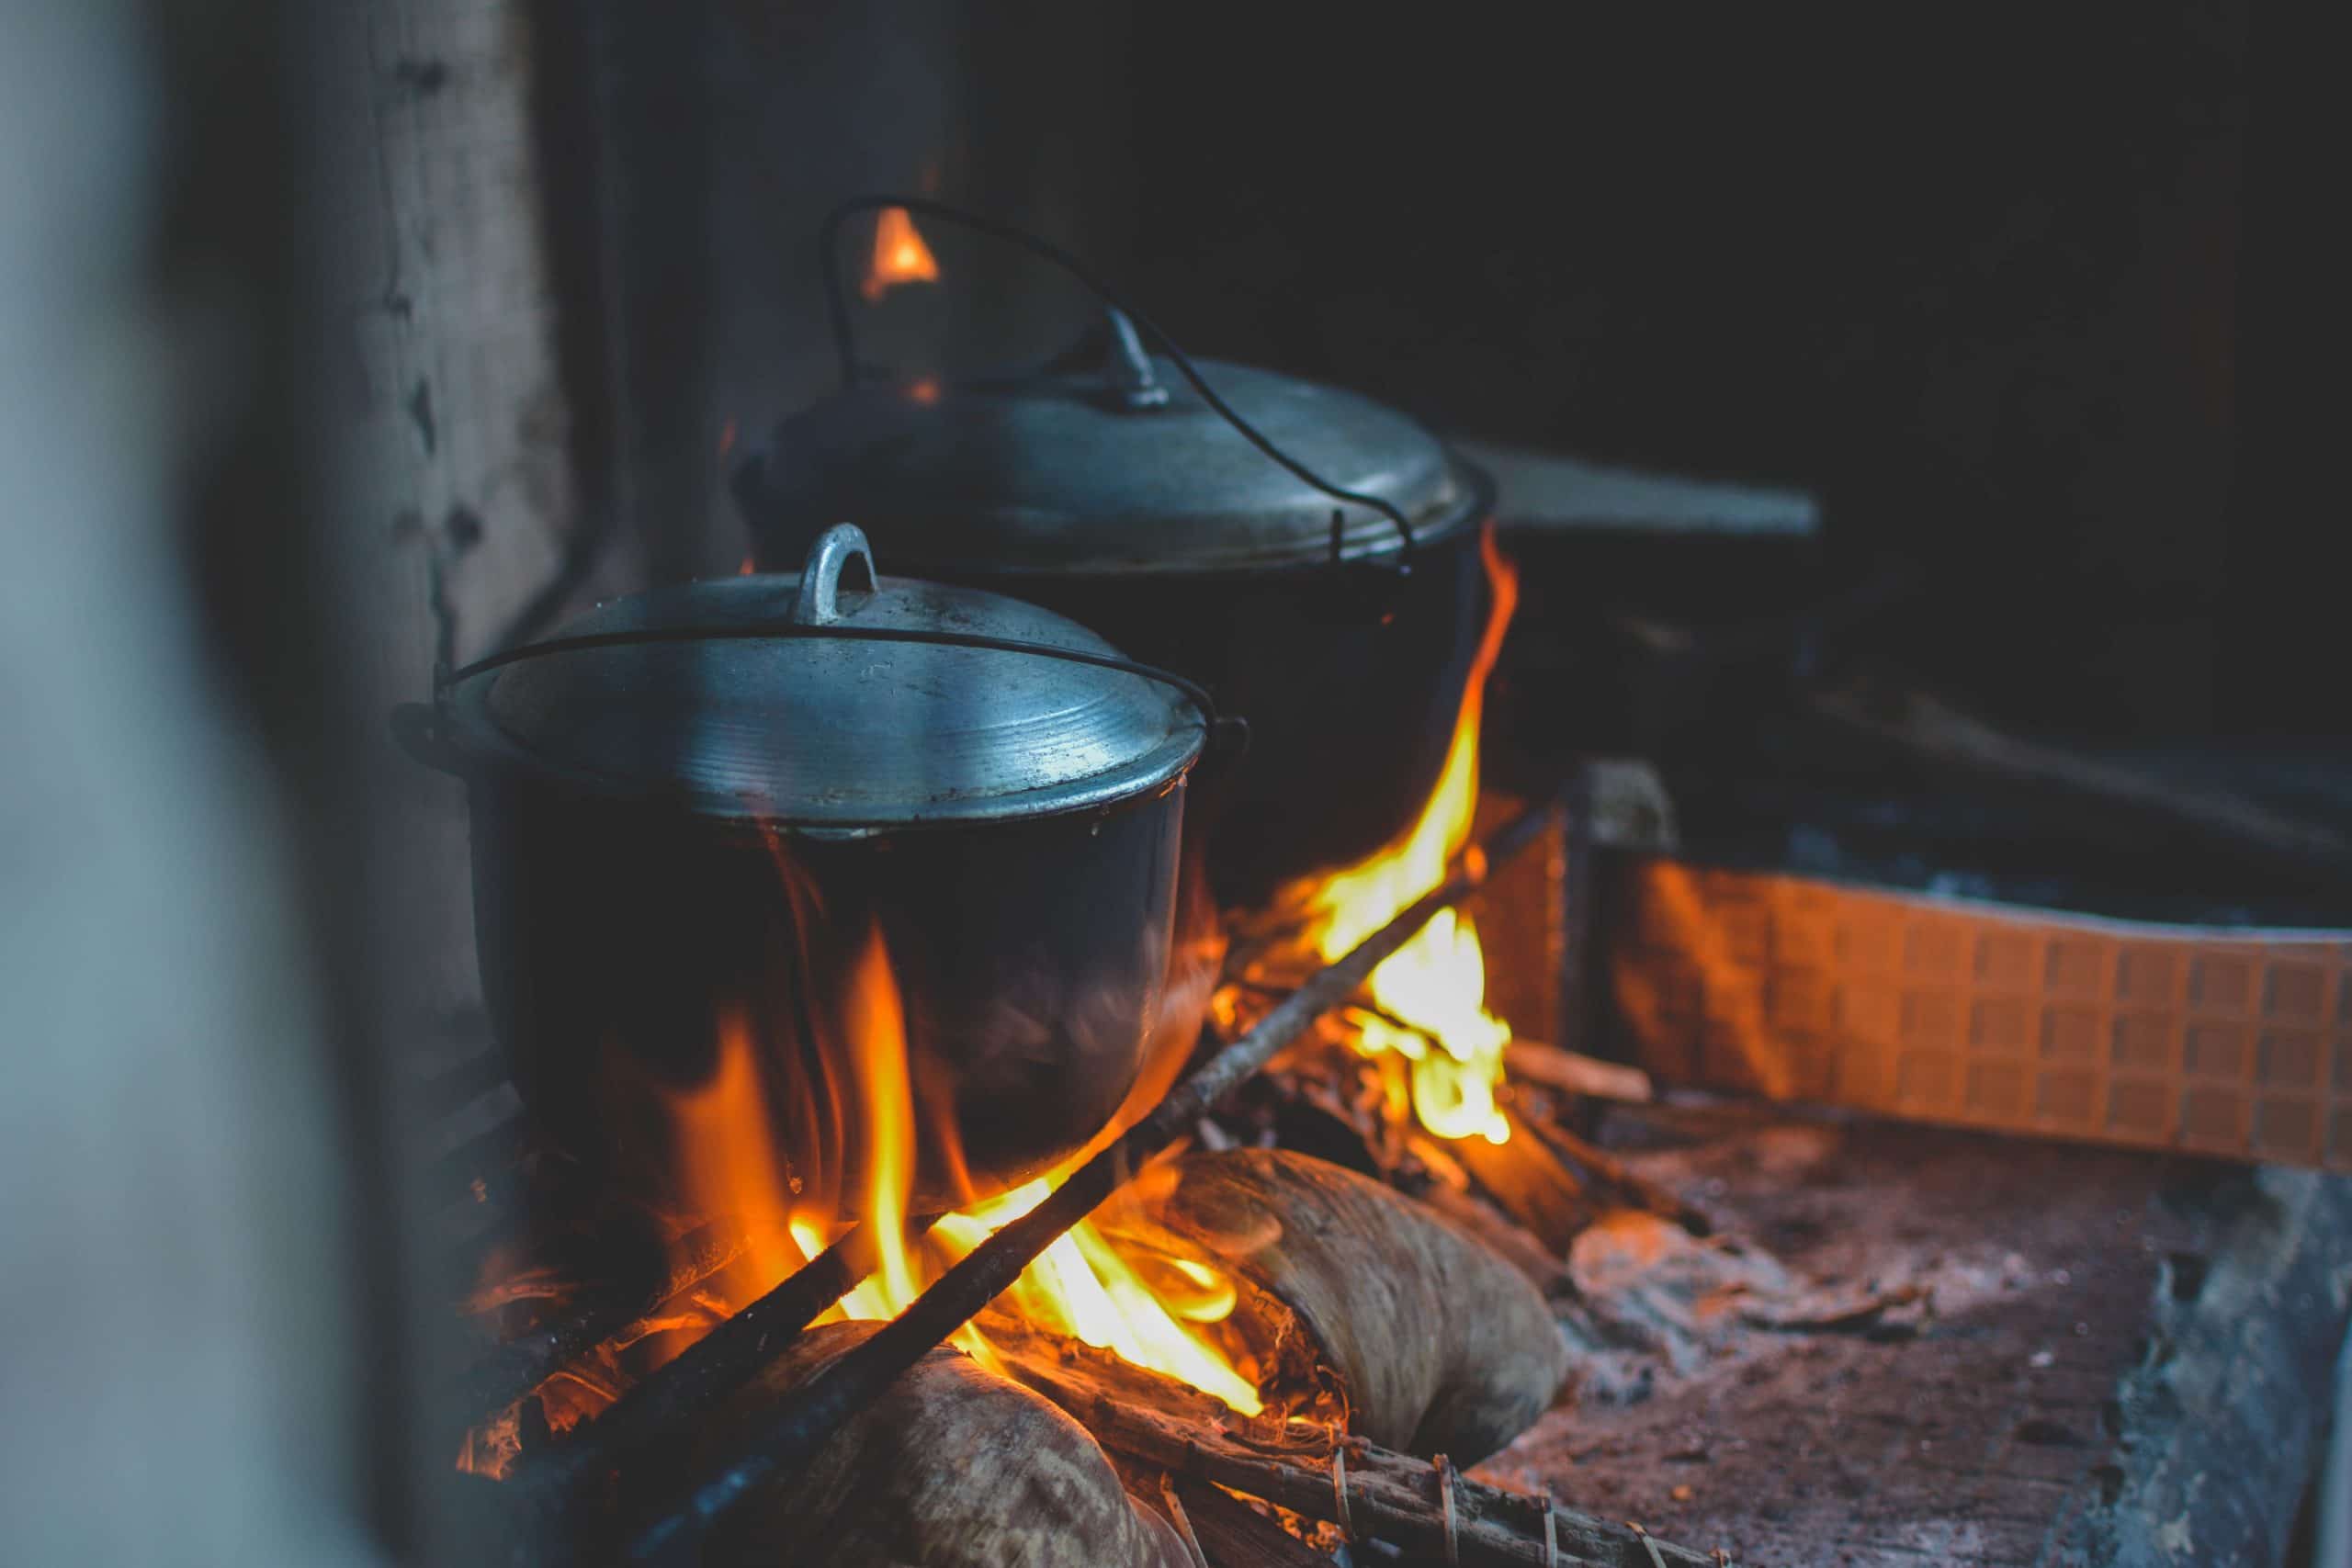 Funding Cooking Stoves in Africa: A Strategy for Carbon Footprint Offset